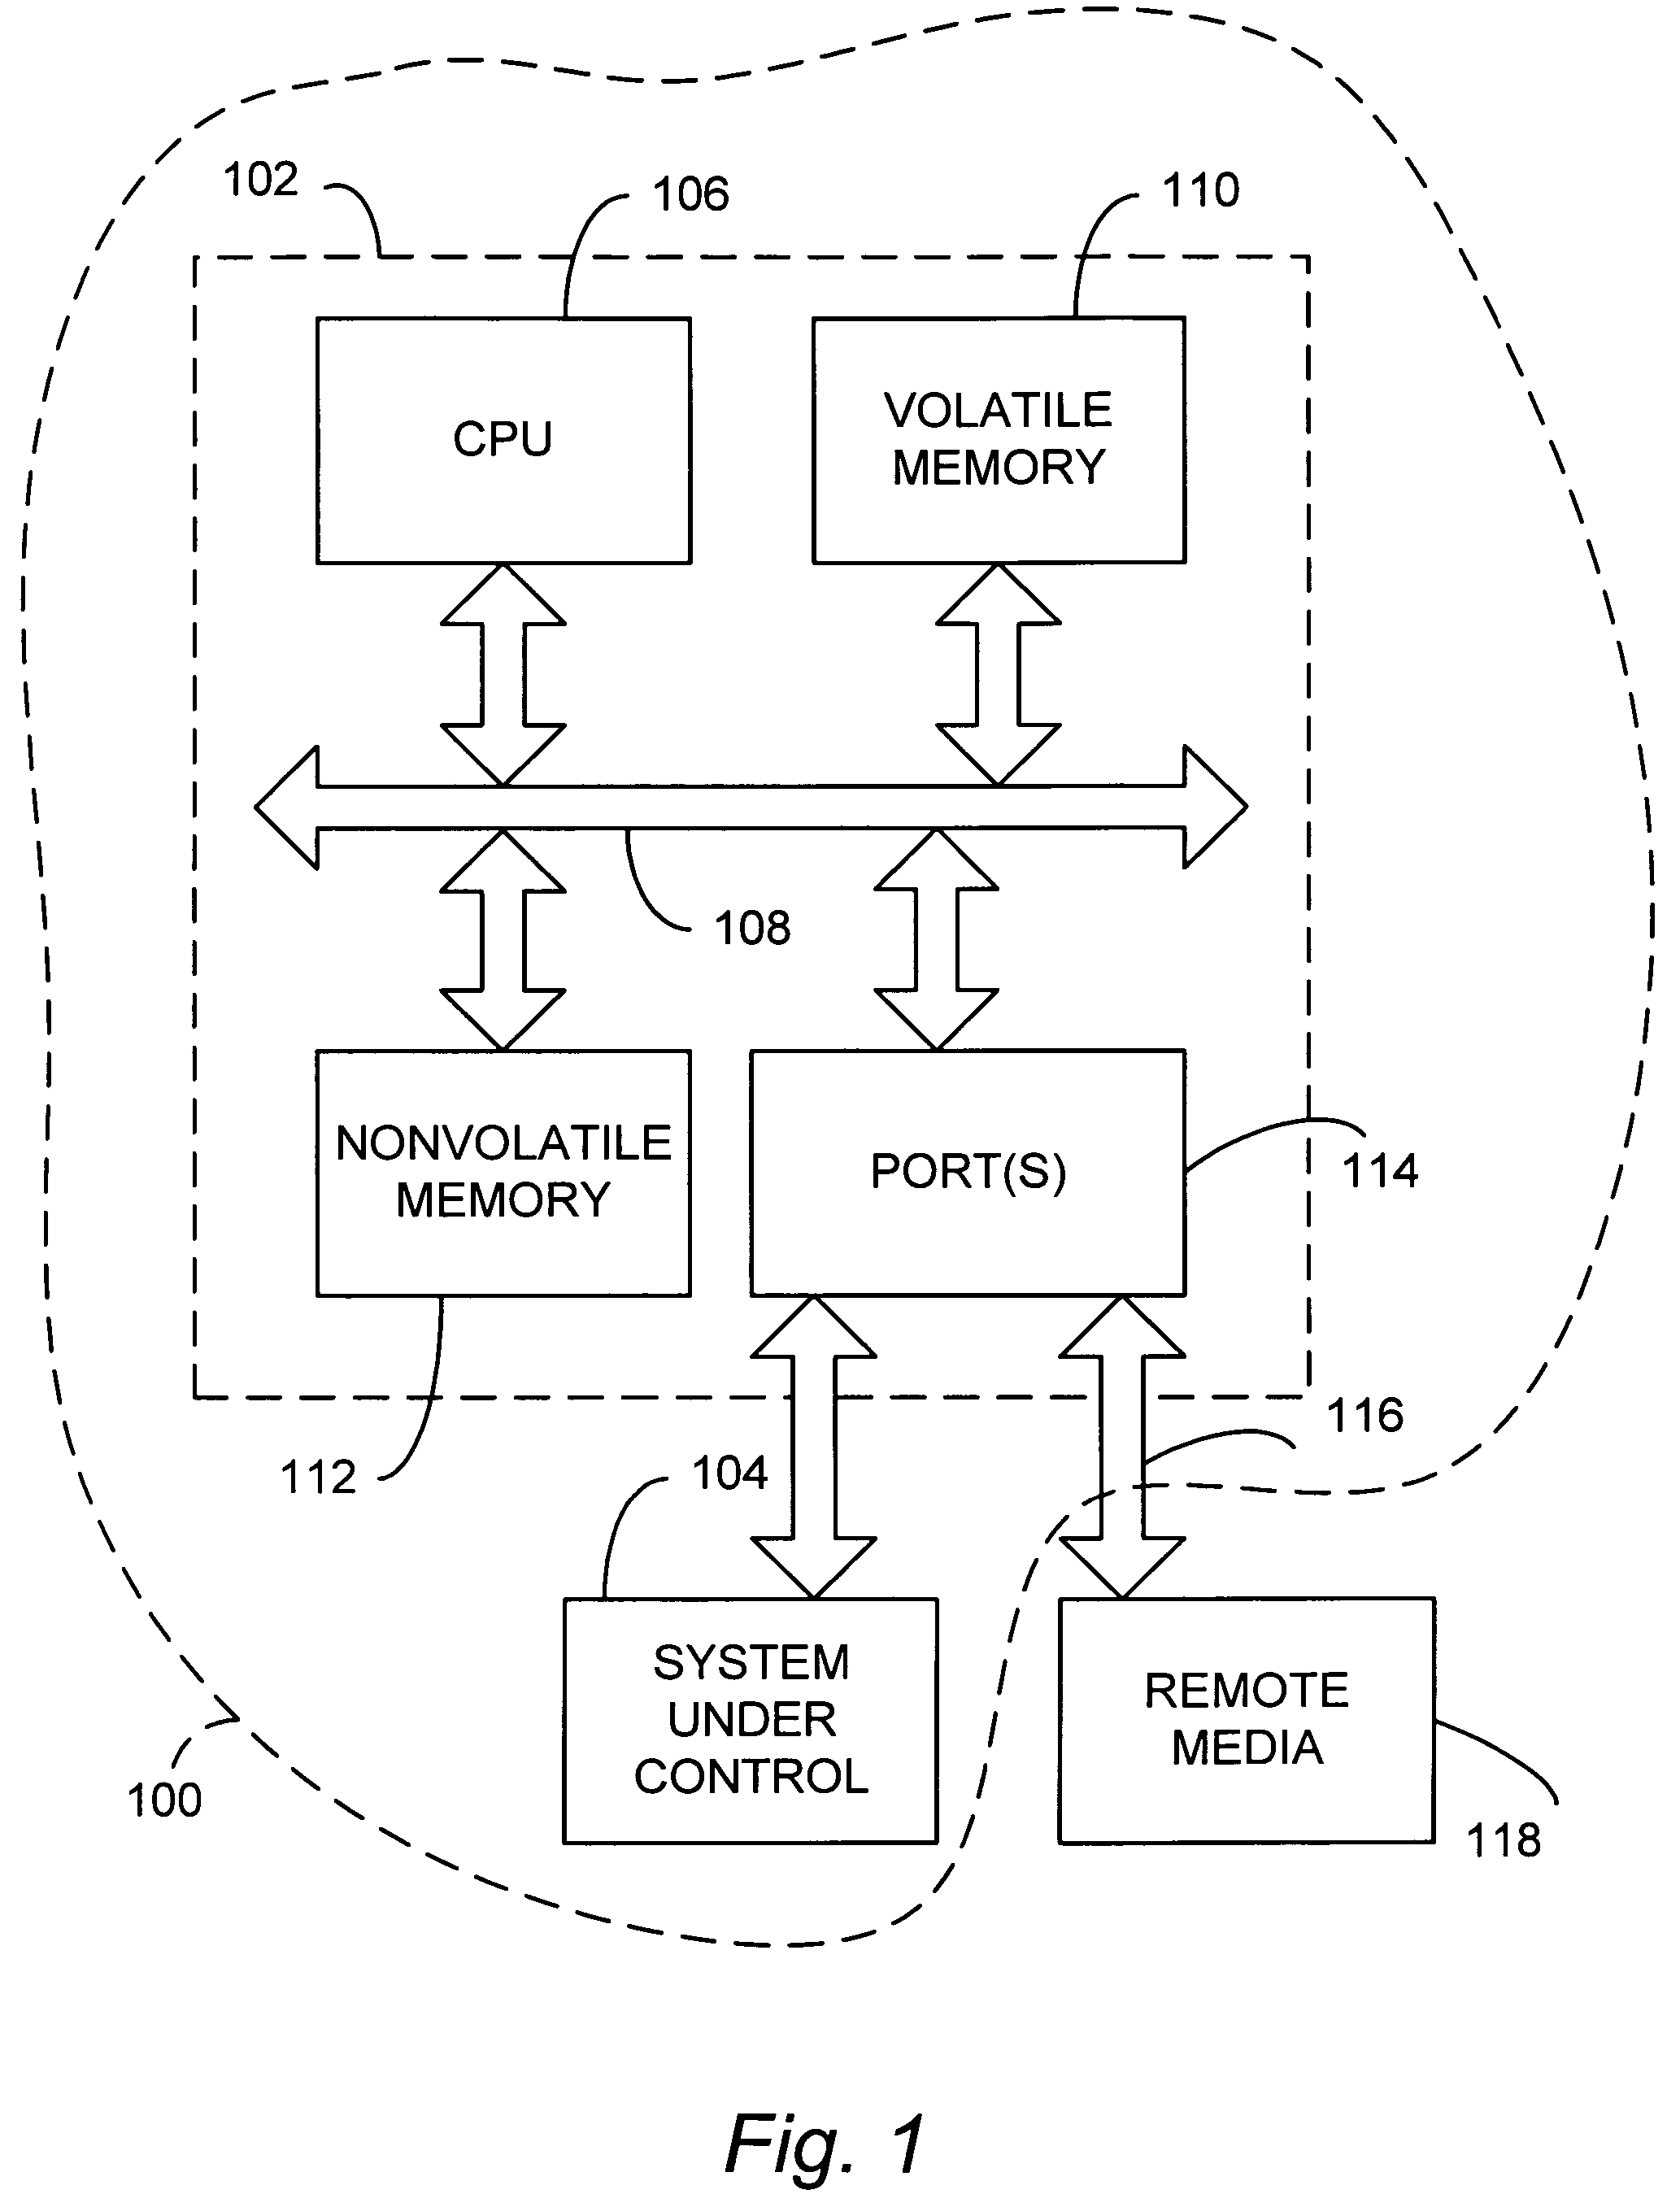 Automatic device configuration using removable storage